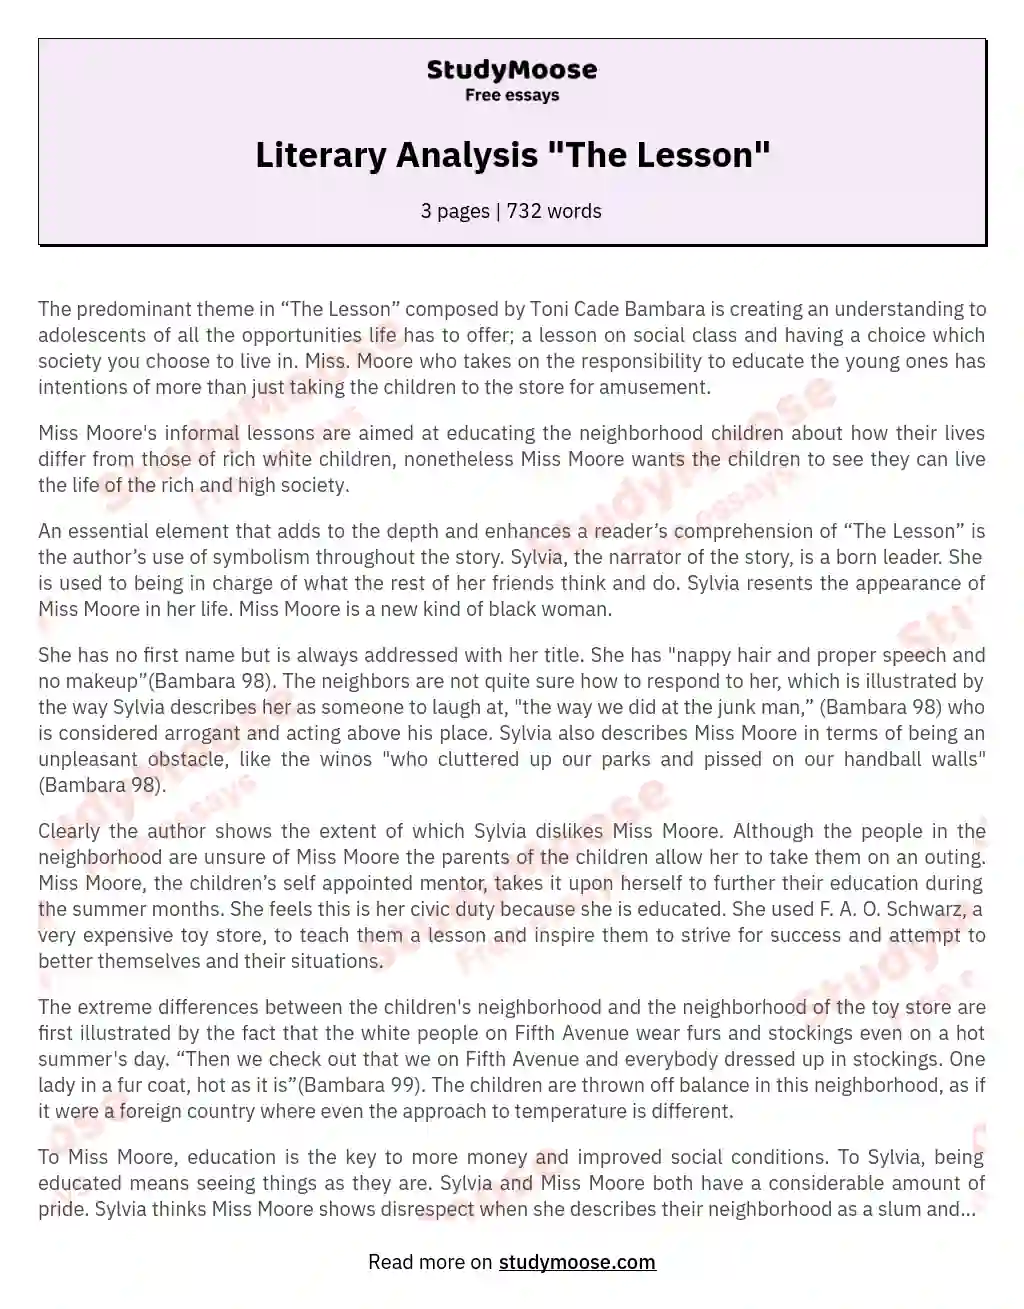 Exploring Social Class and Empowerment in "The Lesson" essay